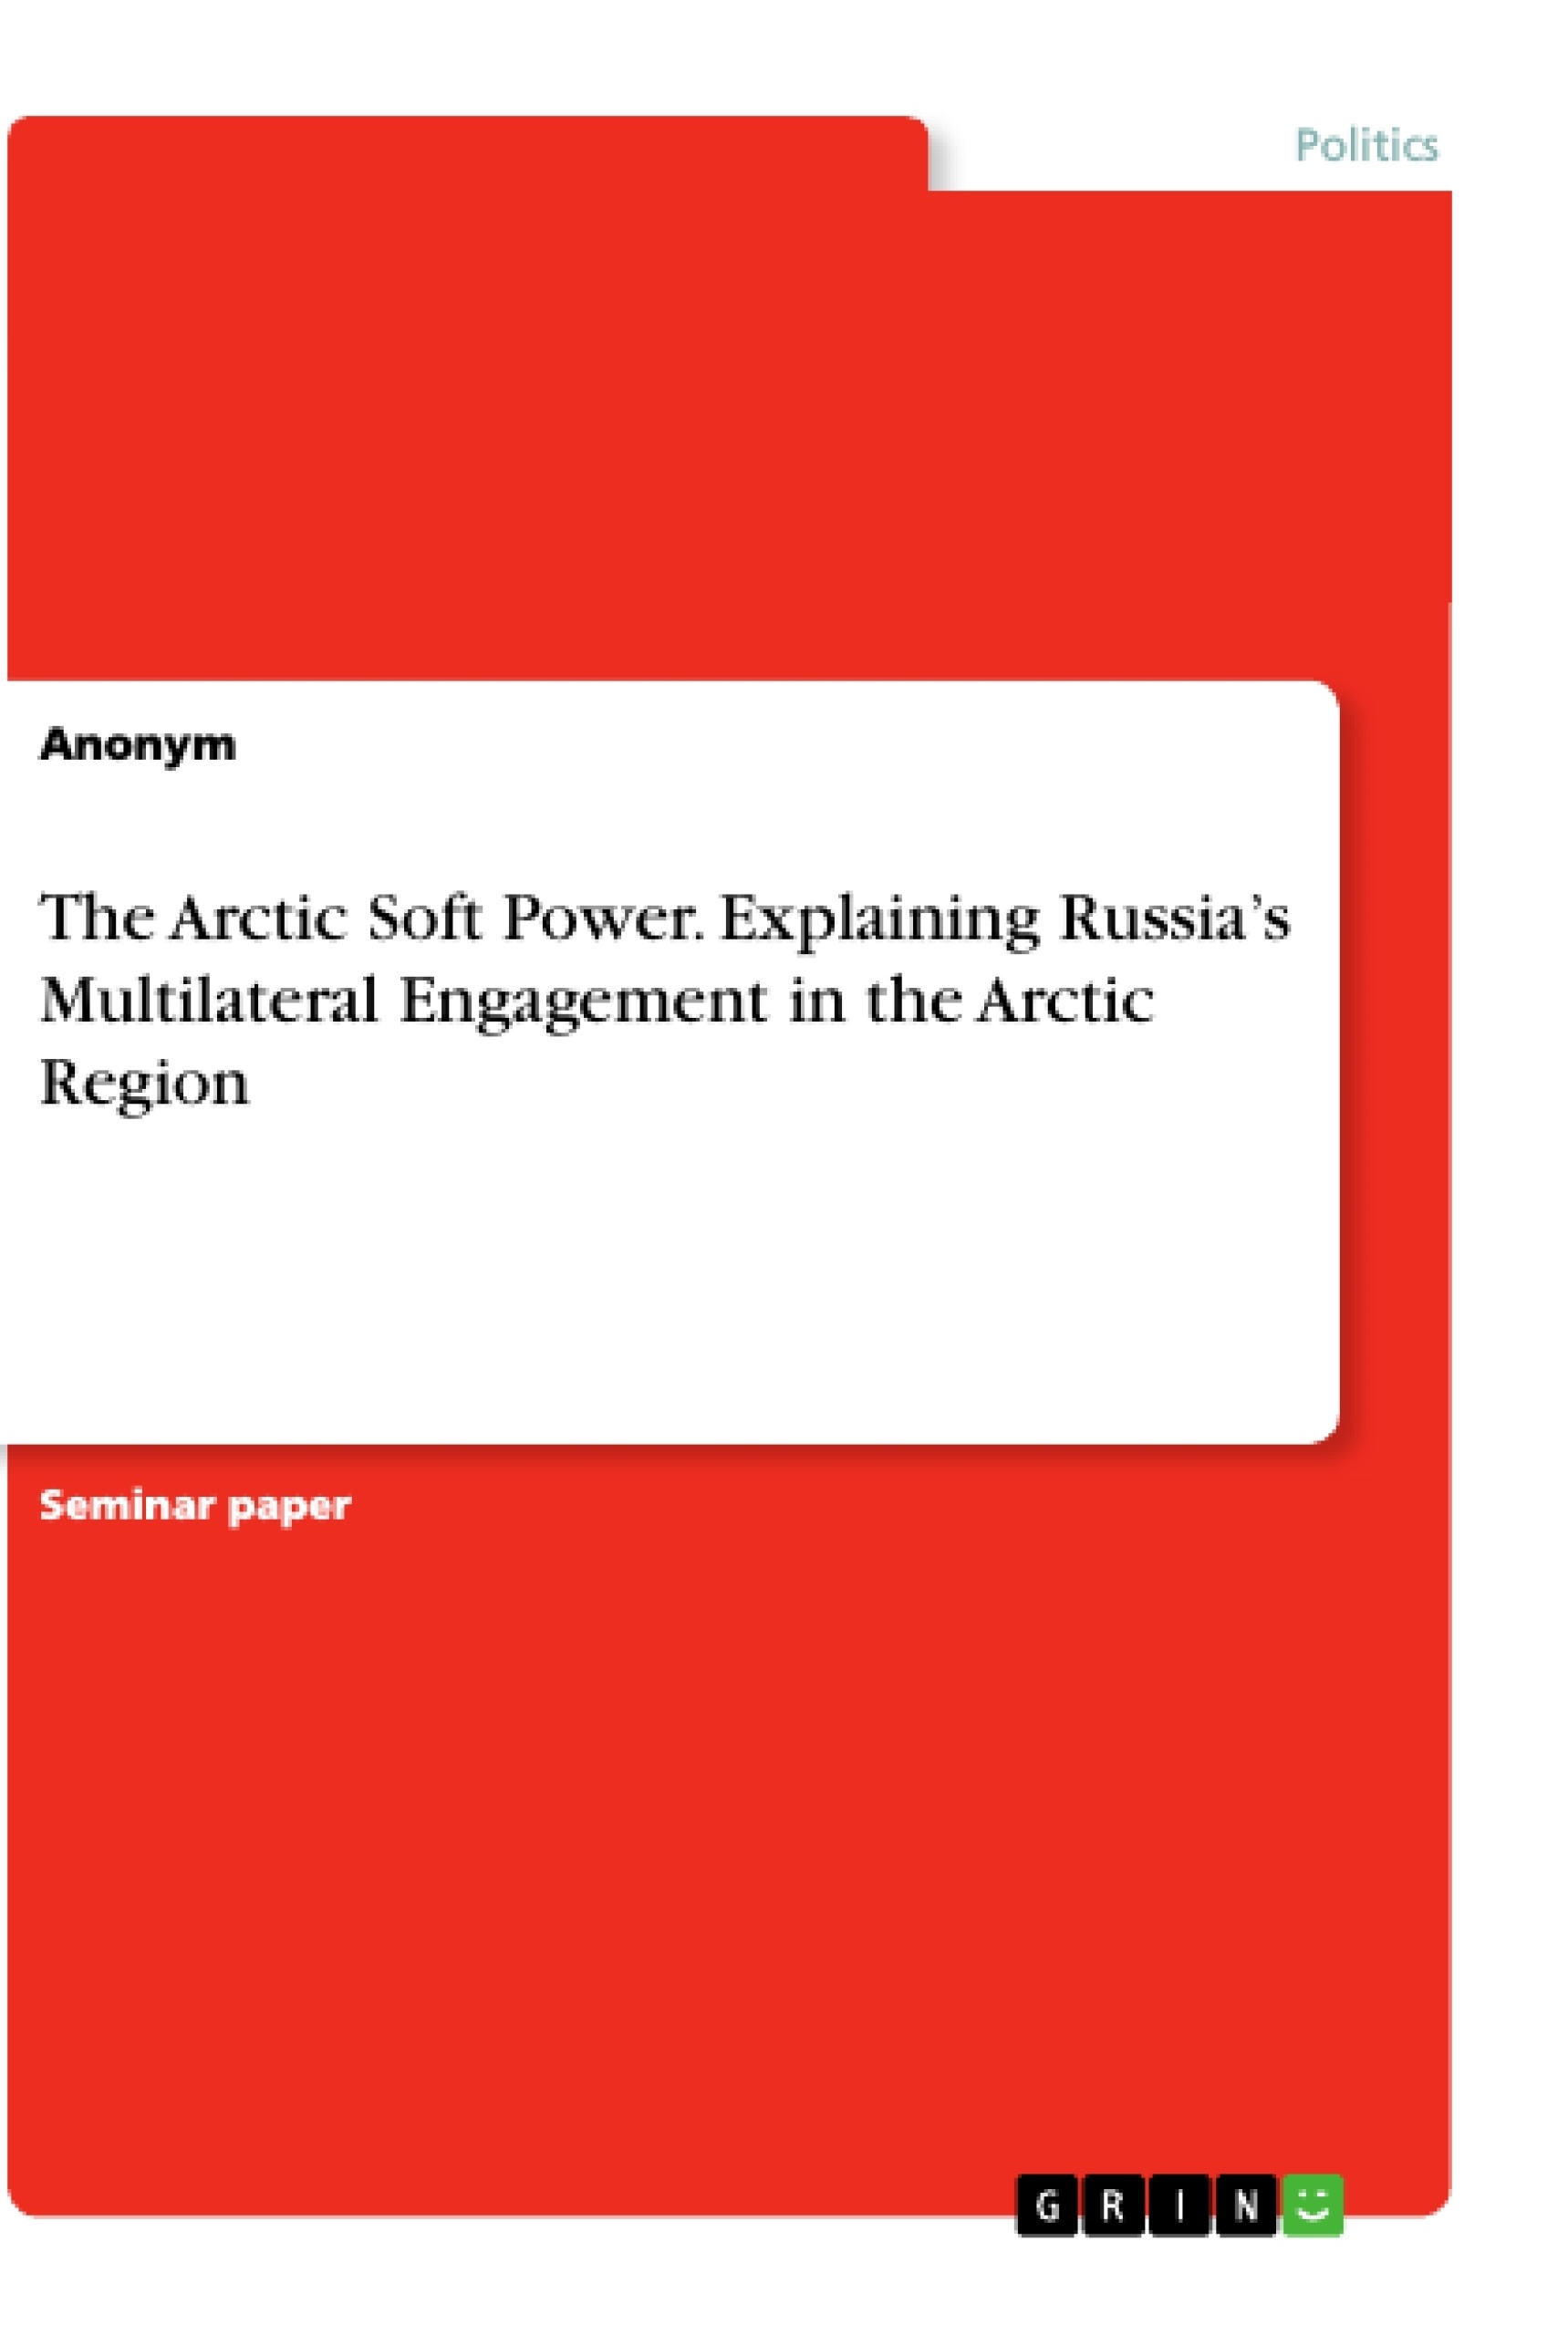 Titre: The Arctic Soft Power. Explaining Russia’s Multilateral Engagement in the Arctic Region